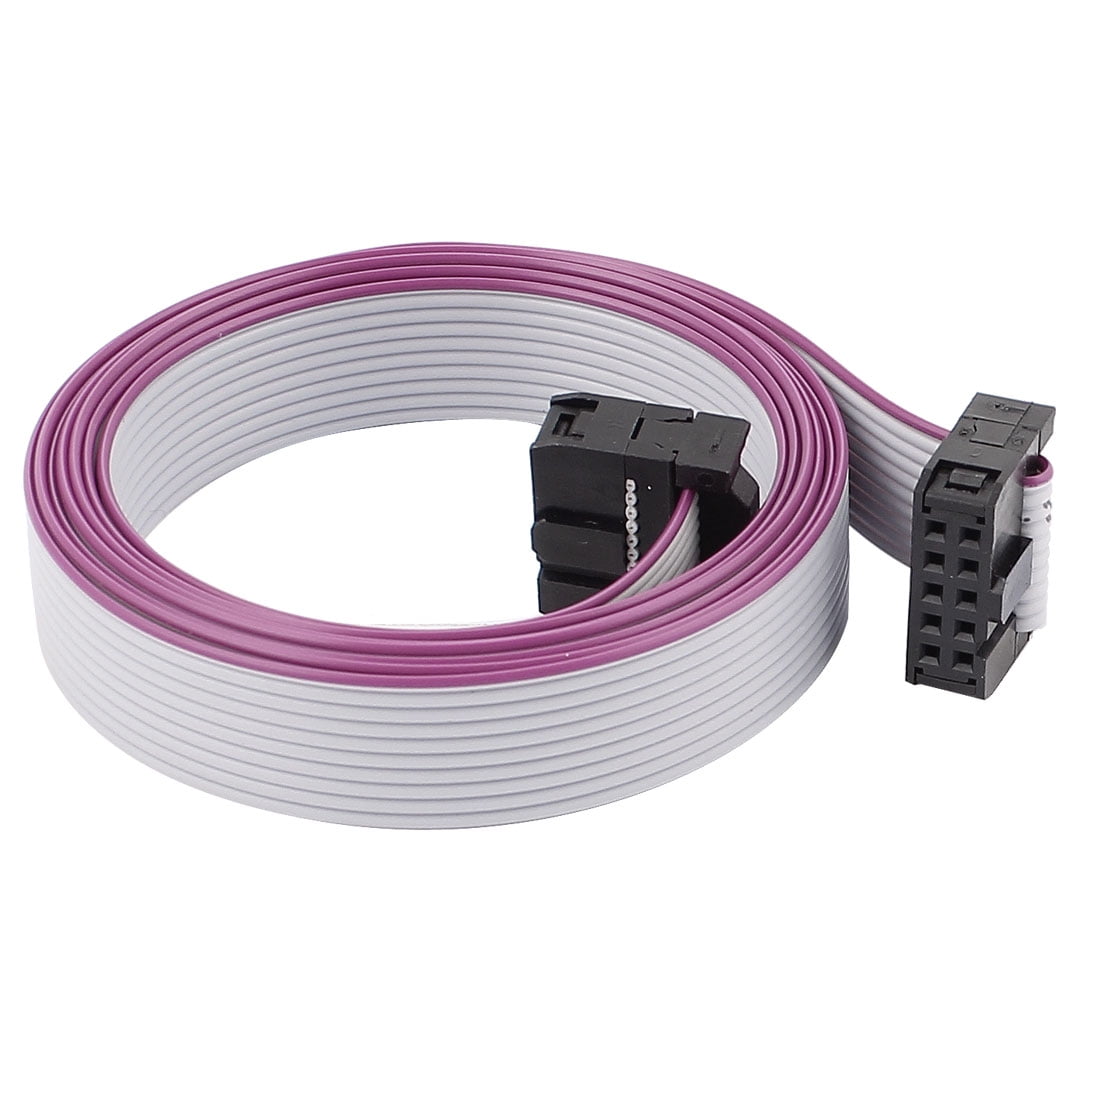 2.54mm Pitch 34 Pin F/F Connector IDC Flat Ribbon Cable 148cm Length 